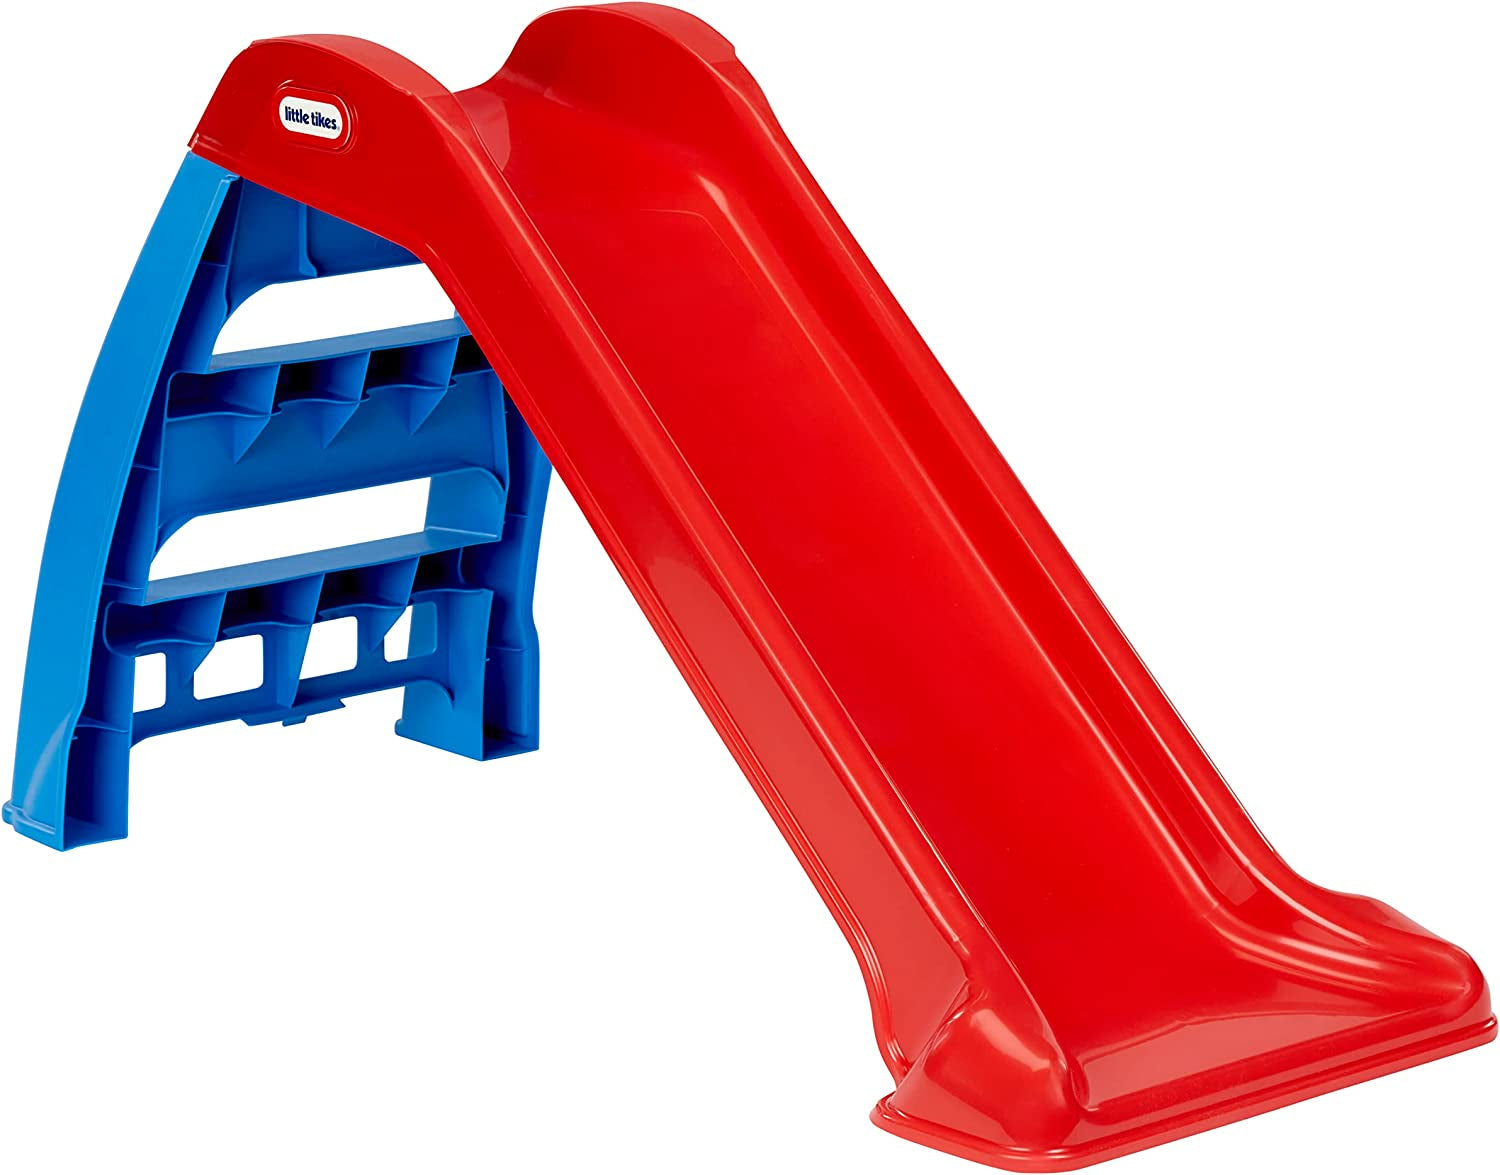 Little Tikes First Slide Toddler Slide, Easy Set up Playset for Indoor Outdoor Backyard, Easy to Store, Safe Toy for Toddler, Slip and Slide for Kids (Red/Blue), 39.00''L X 18.00''W X 23.00''H